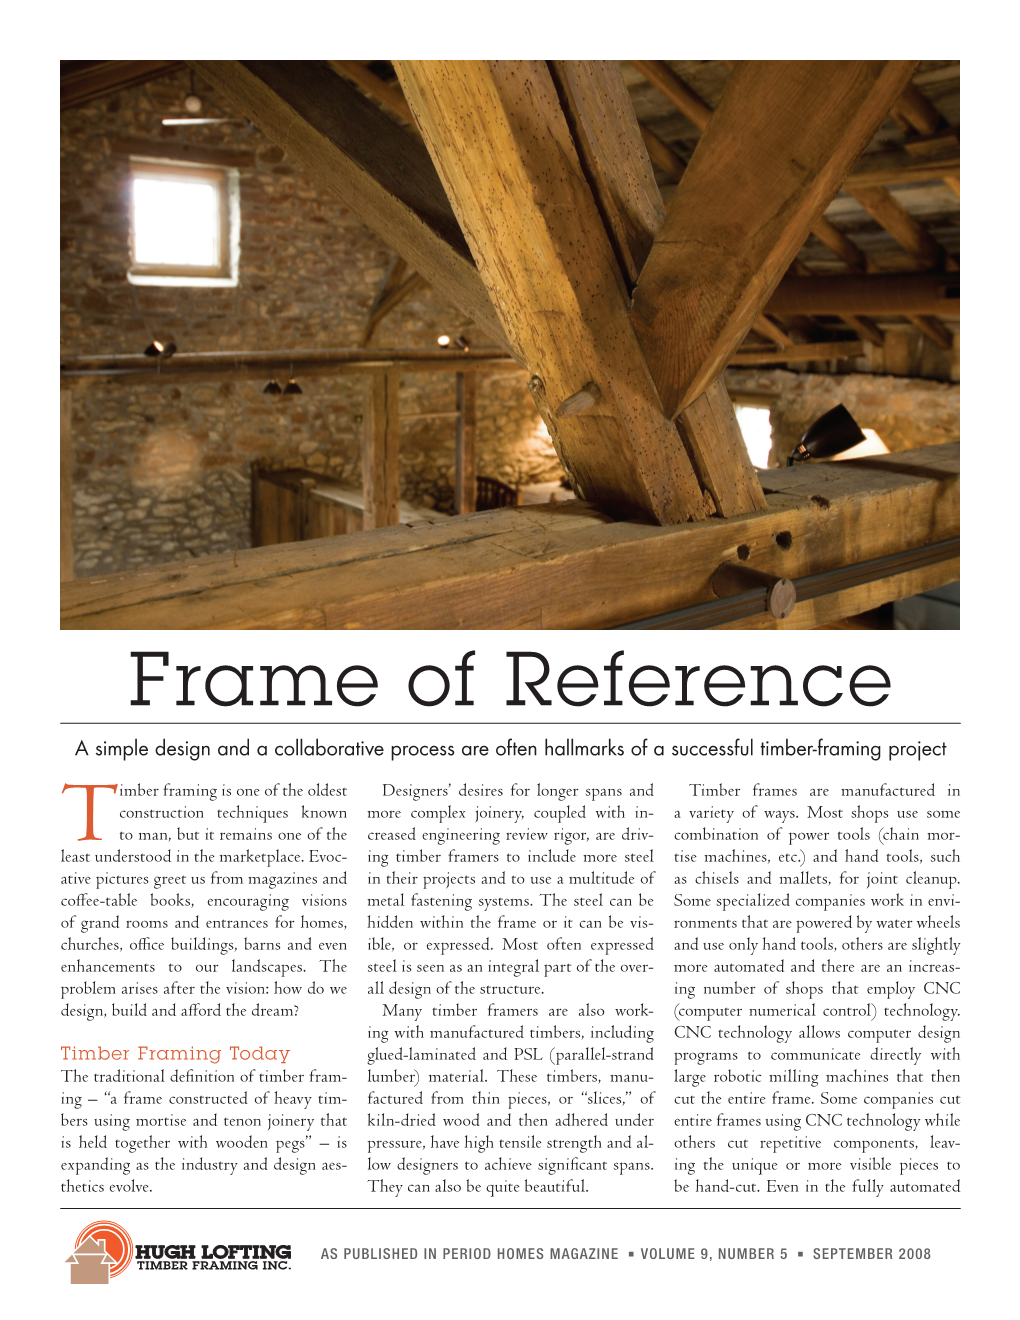 Frame of Reference a Simple Design and a Collaborative Process Are Often Hallmarks of a Successful Timber-Framing Project